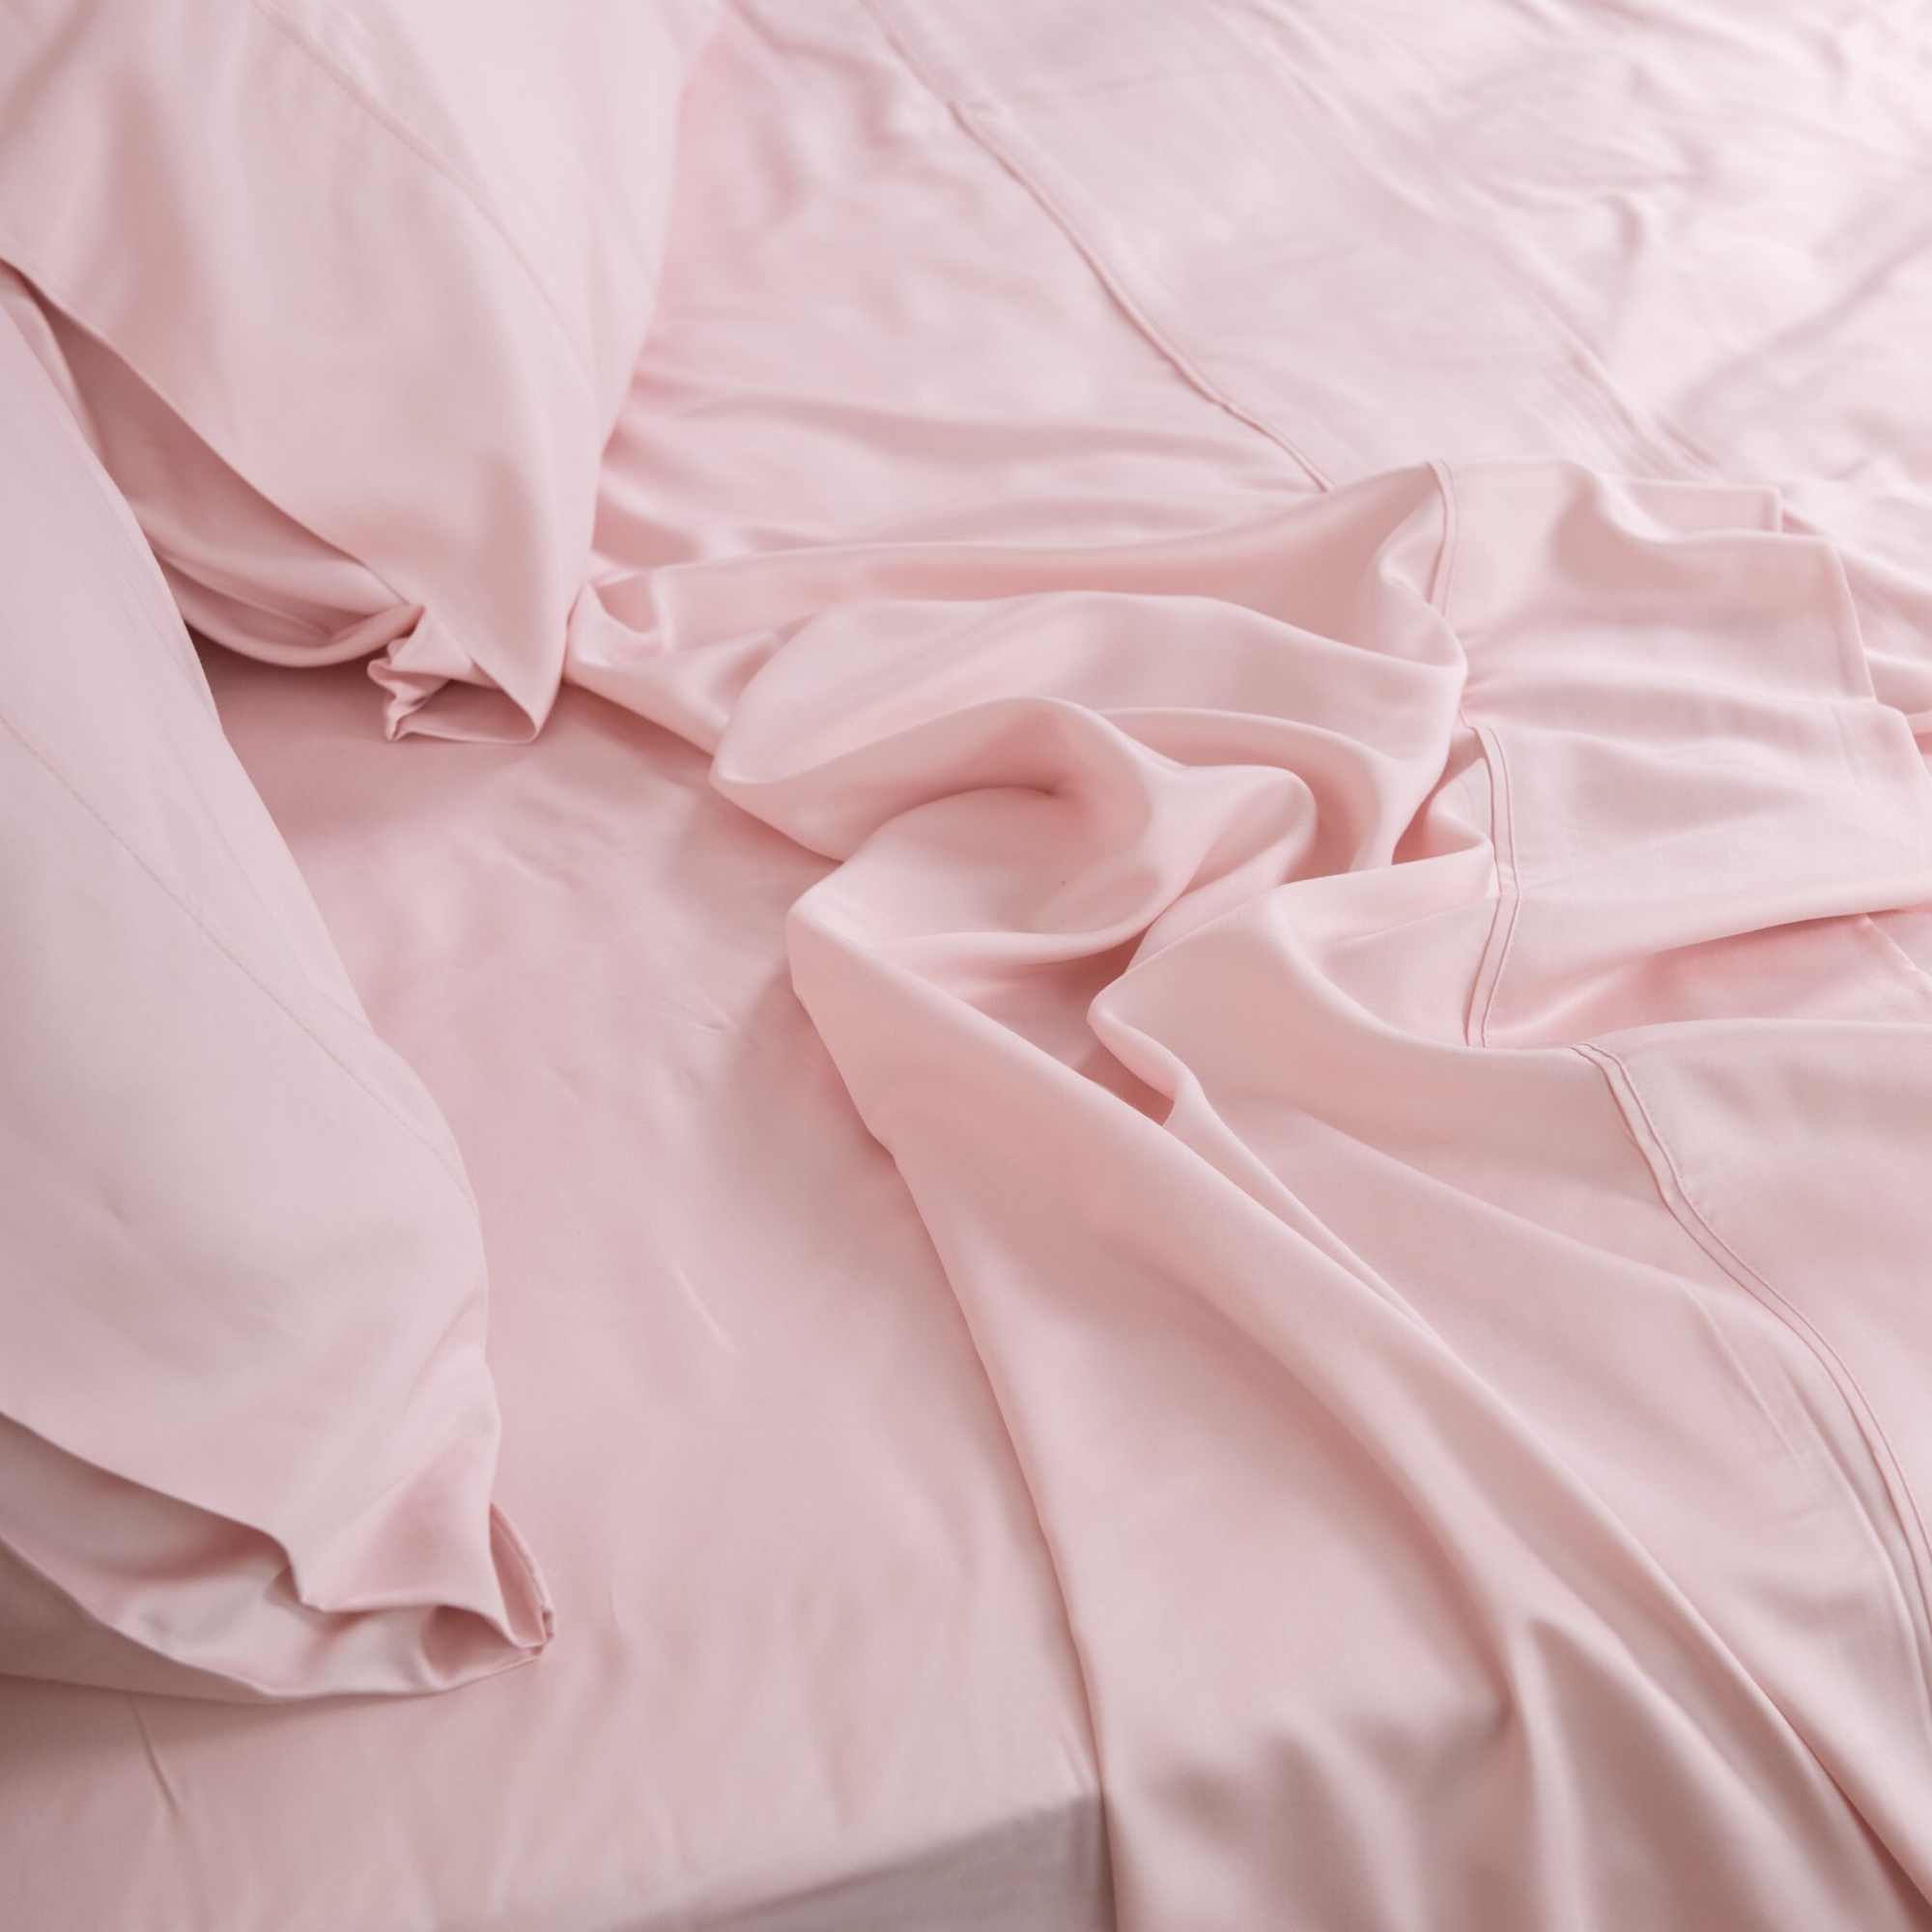 Luxe Pastel Pink Bamboo Sheet Sets. 100% Organic, Luxuriously Soft. King, Queen, Double, King Single and Single Sizes.